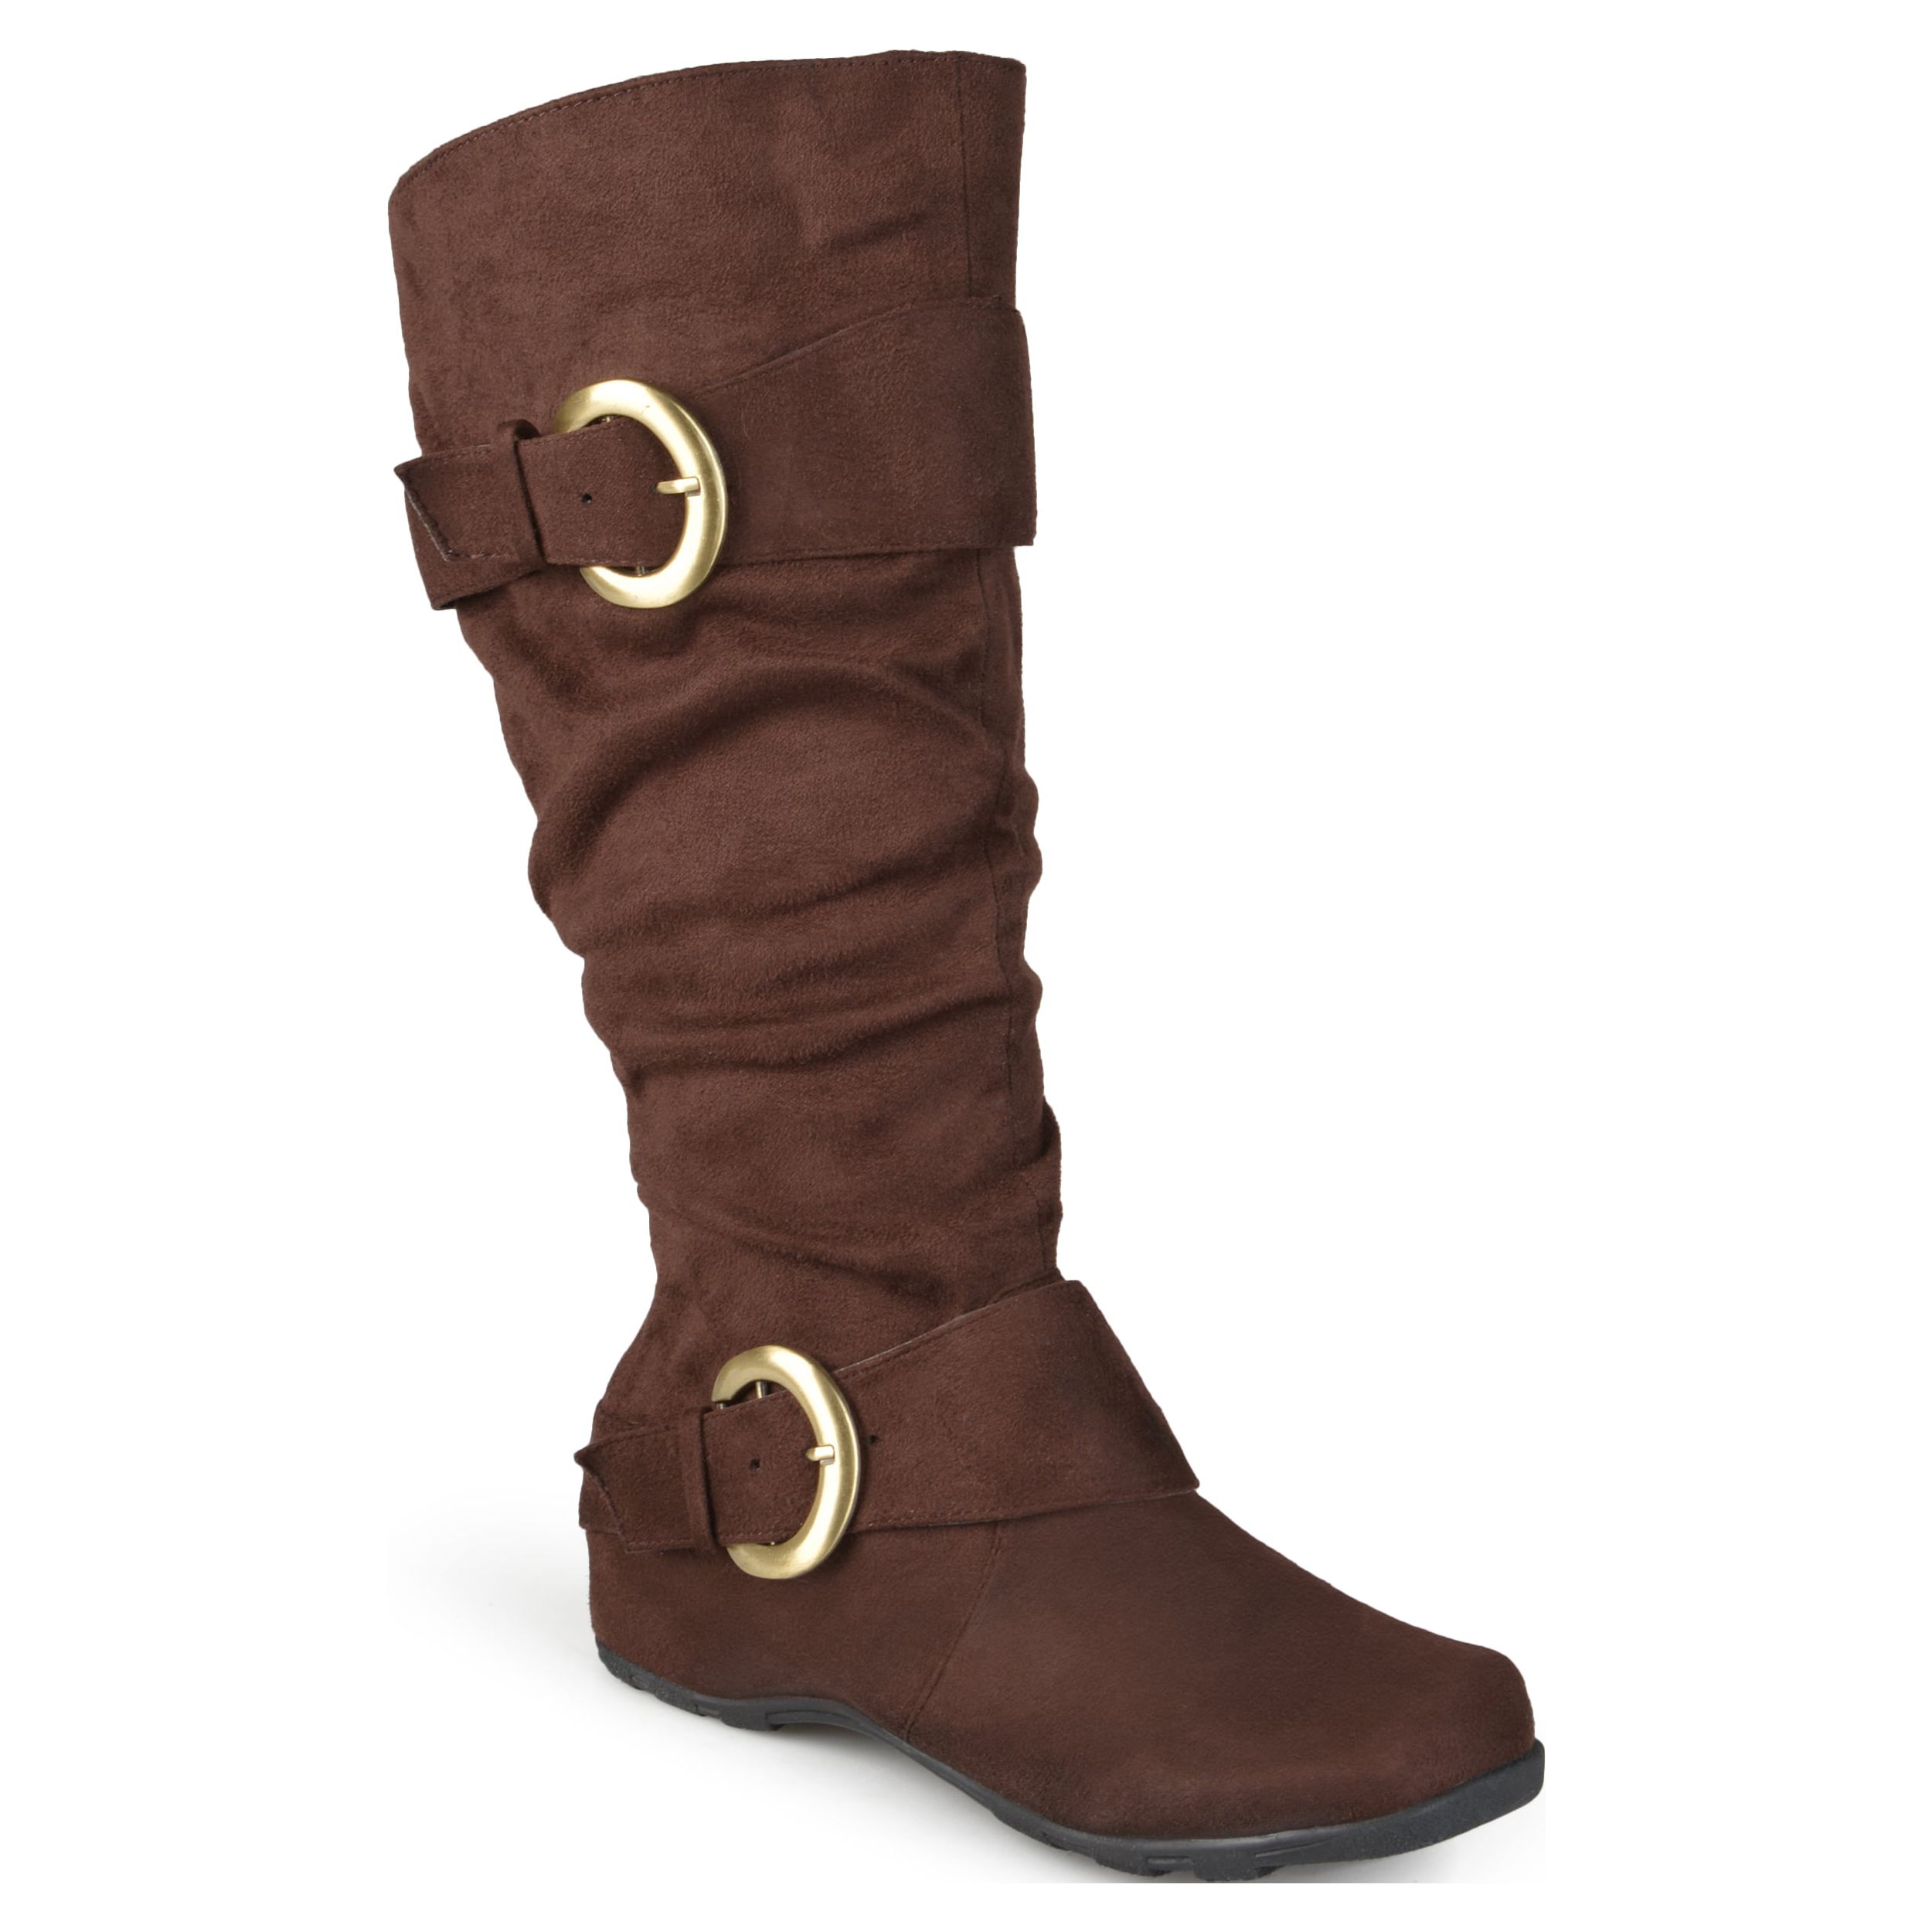 Brinley Co. Women's Extra Wide Calf Mid-Calf Slouch Riding Boots - image 1 of 8